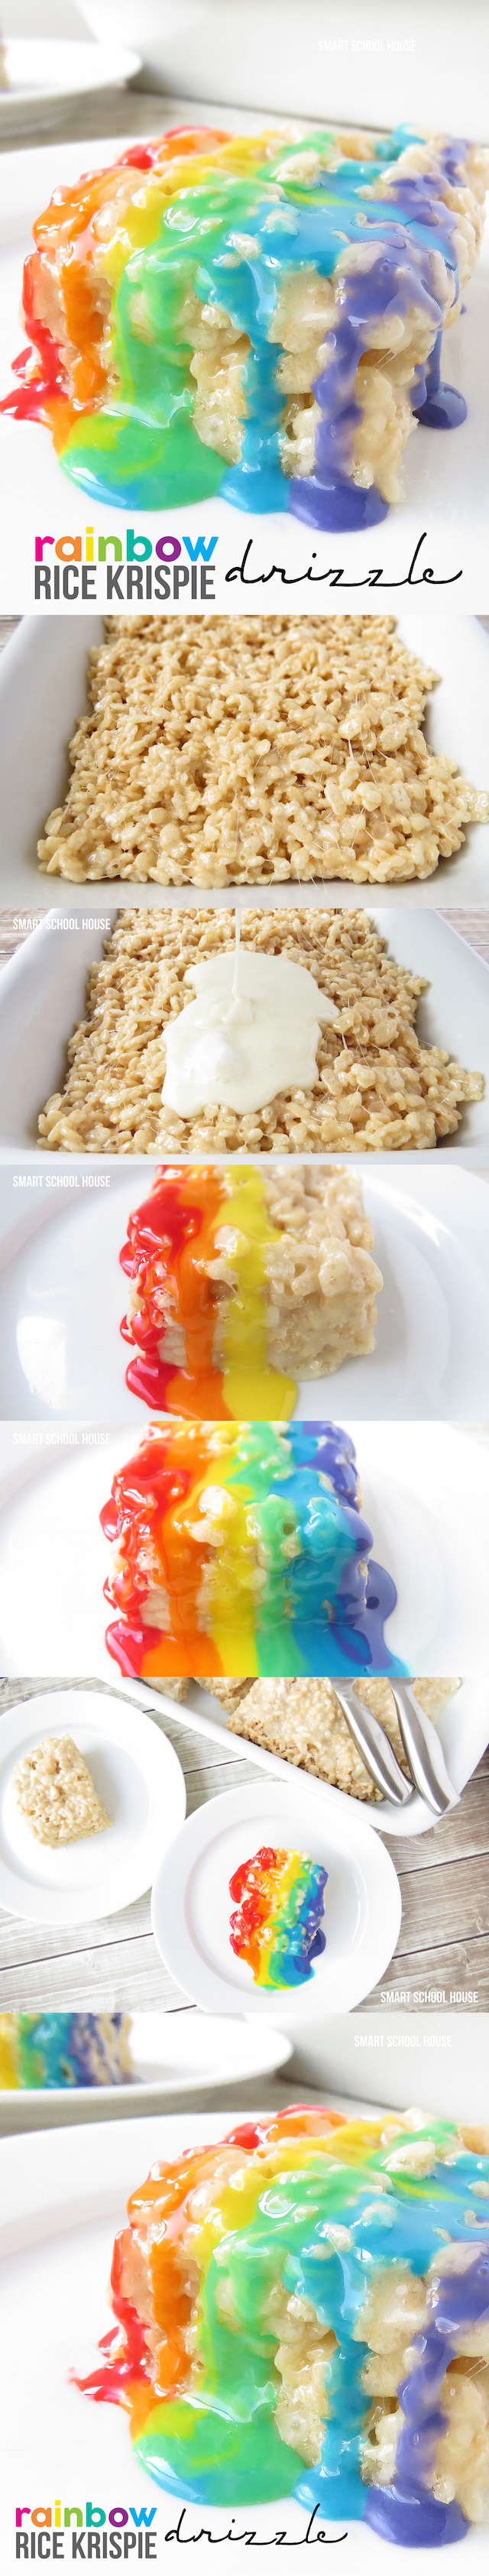 Rainbow Rice Krispie Drizzle. The most decadent rice krispie treats you'll ever see. 